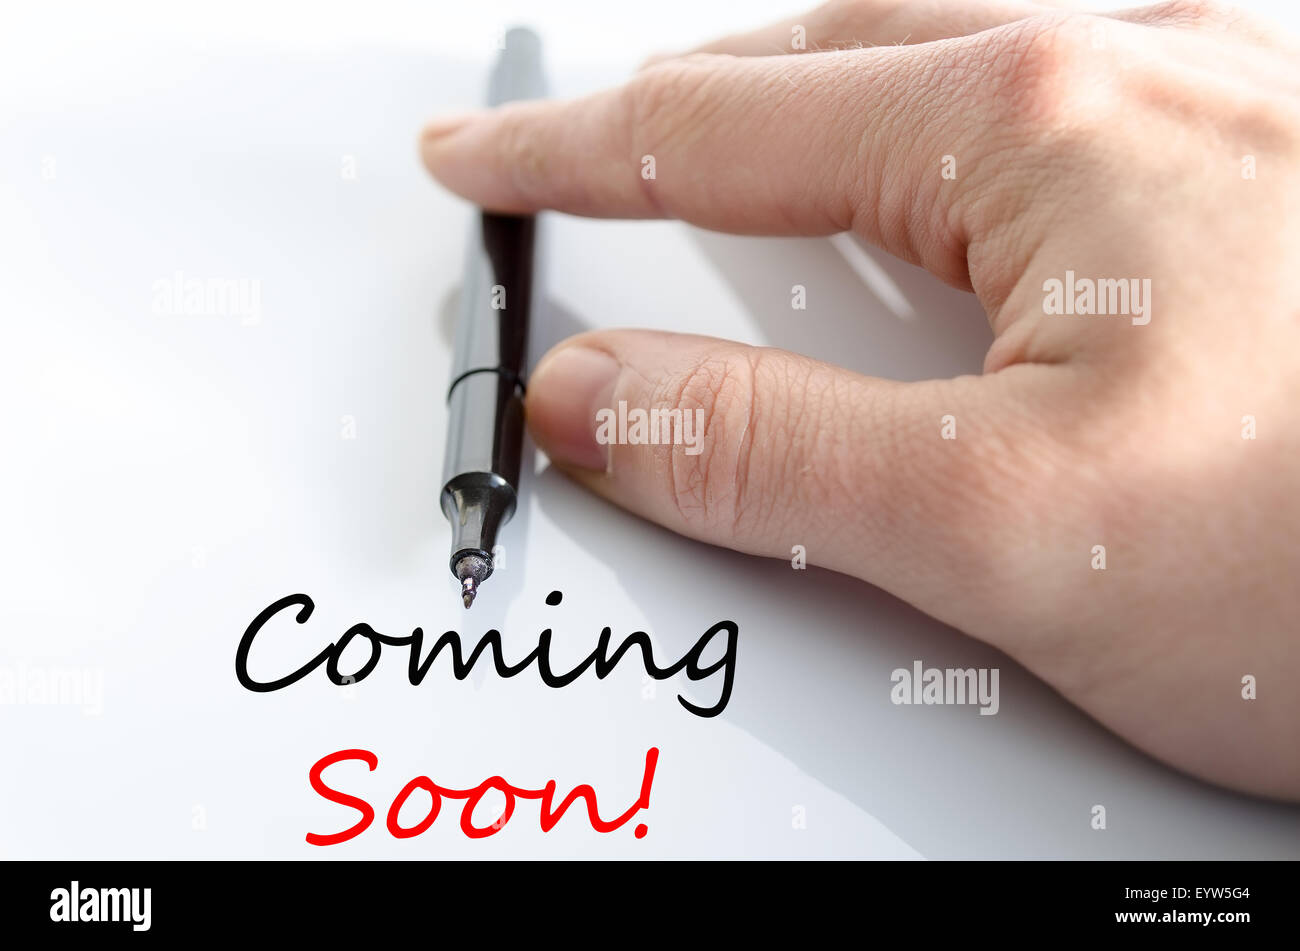 Coming soon text concept isolated over white background Stock Photo